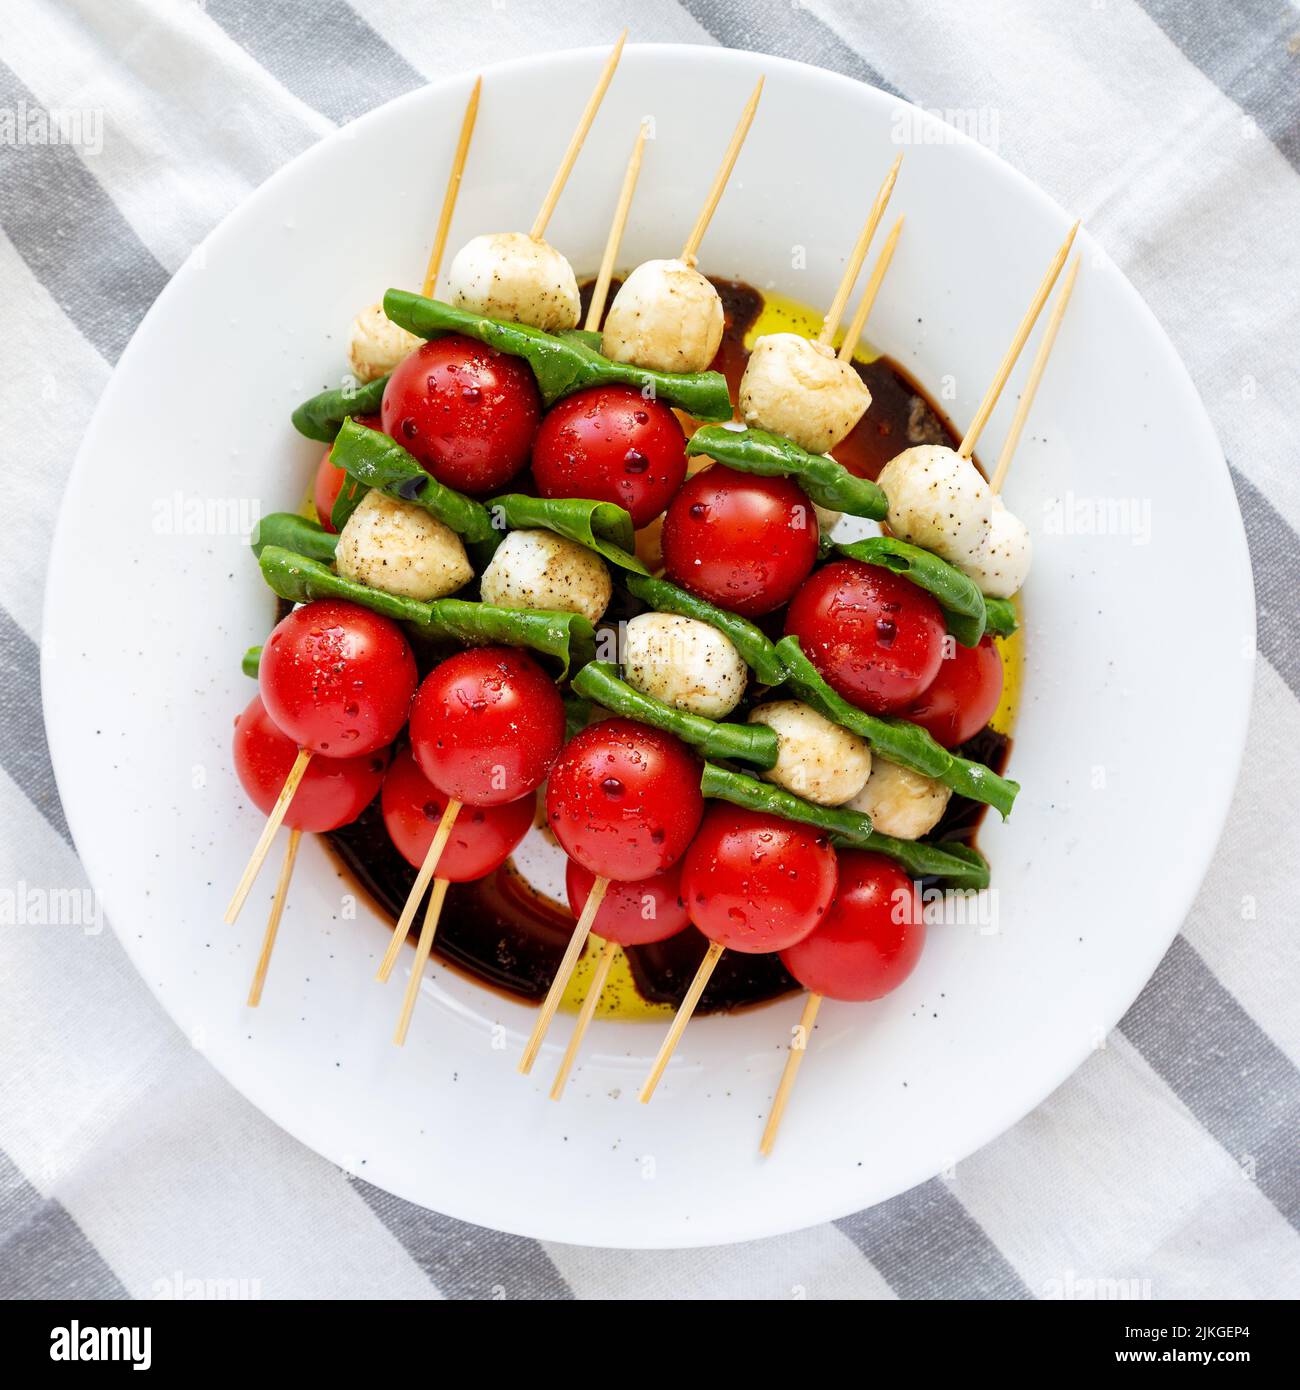 Homemade caprese skewer appetizer on a plate, top view. Flat lay, overhead, from above. Stock Photo